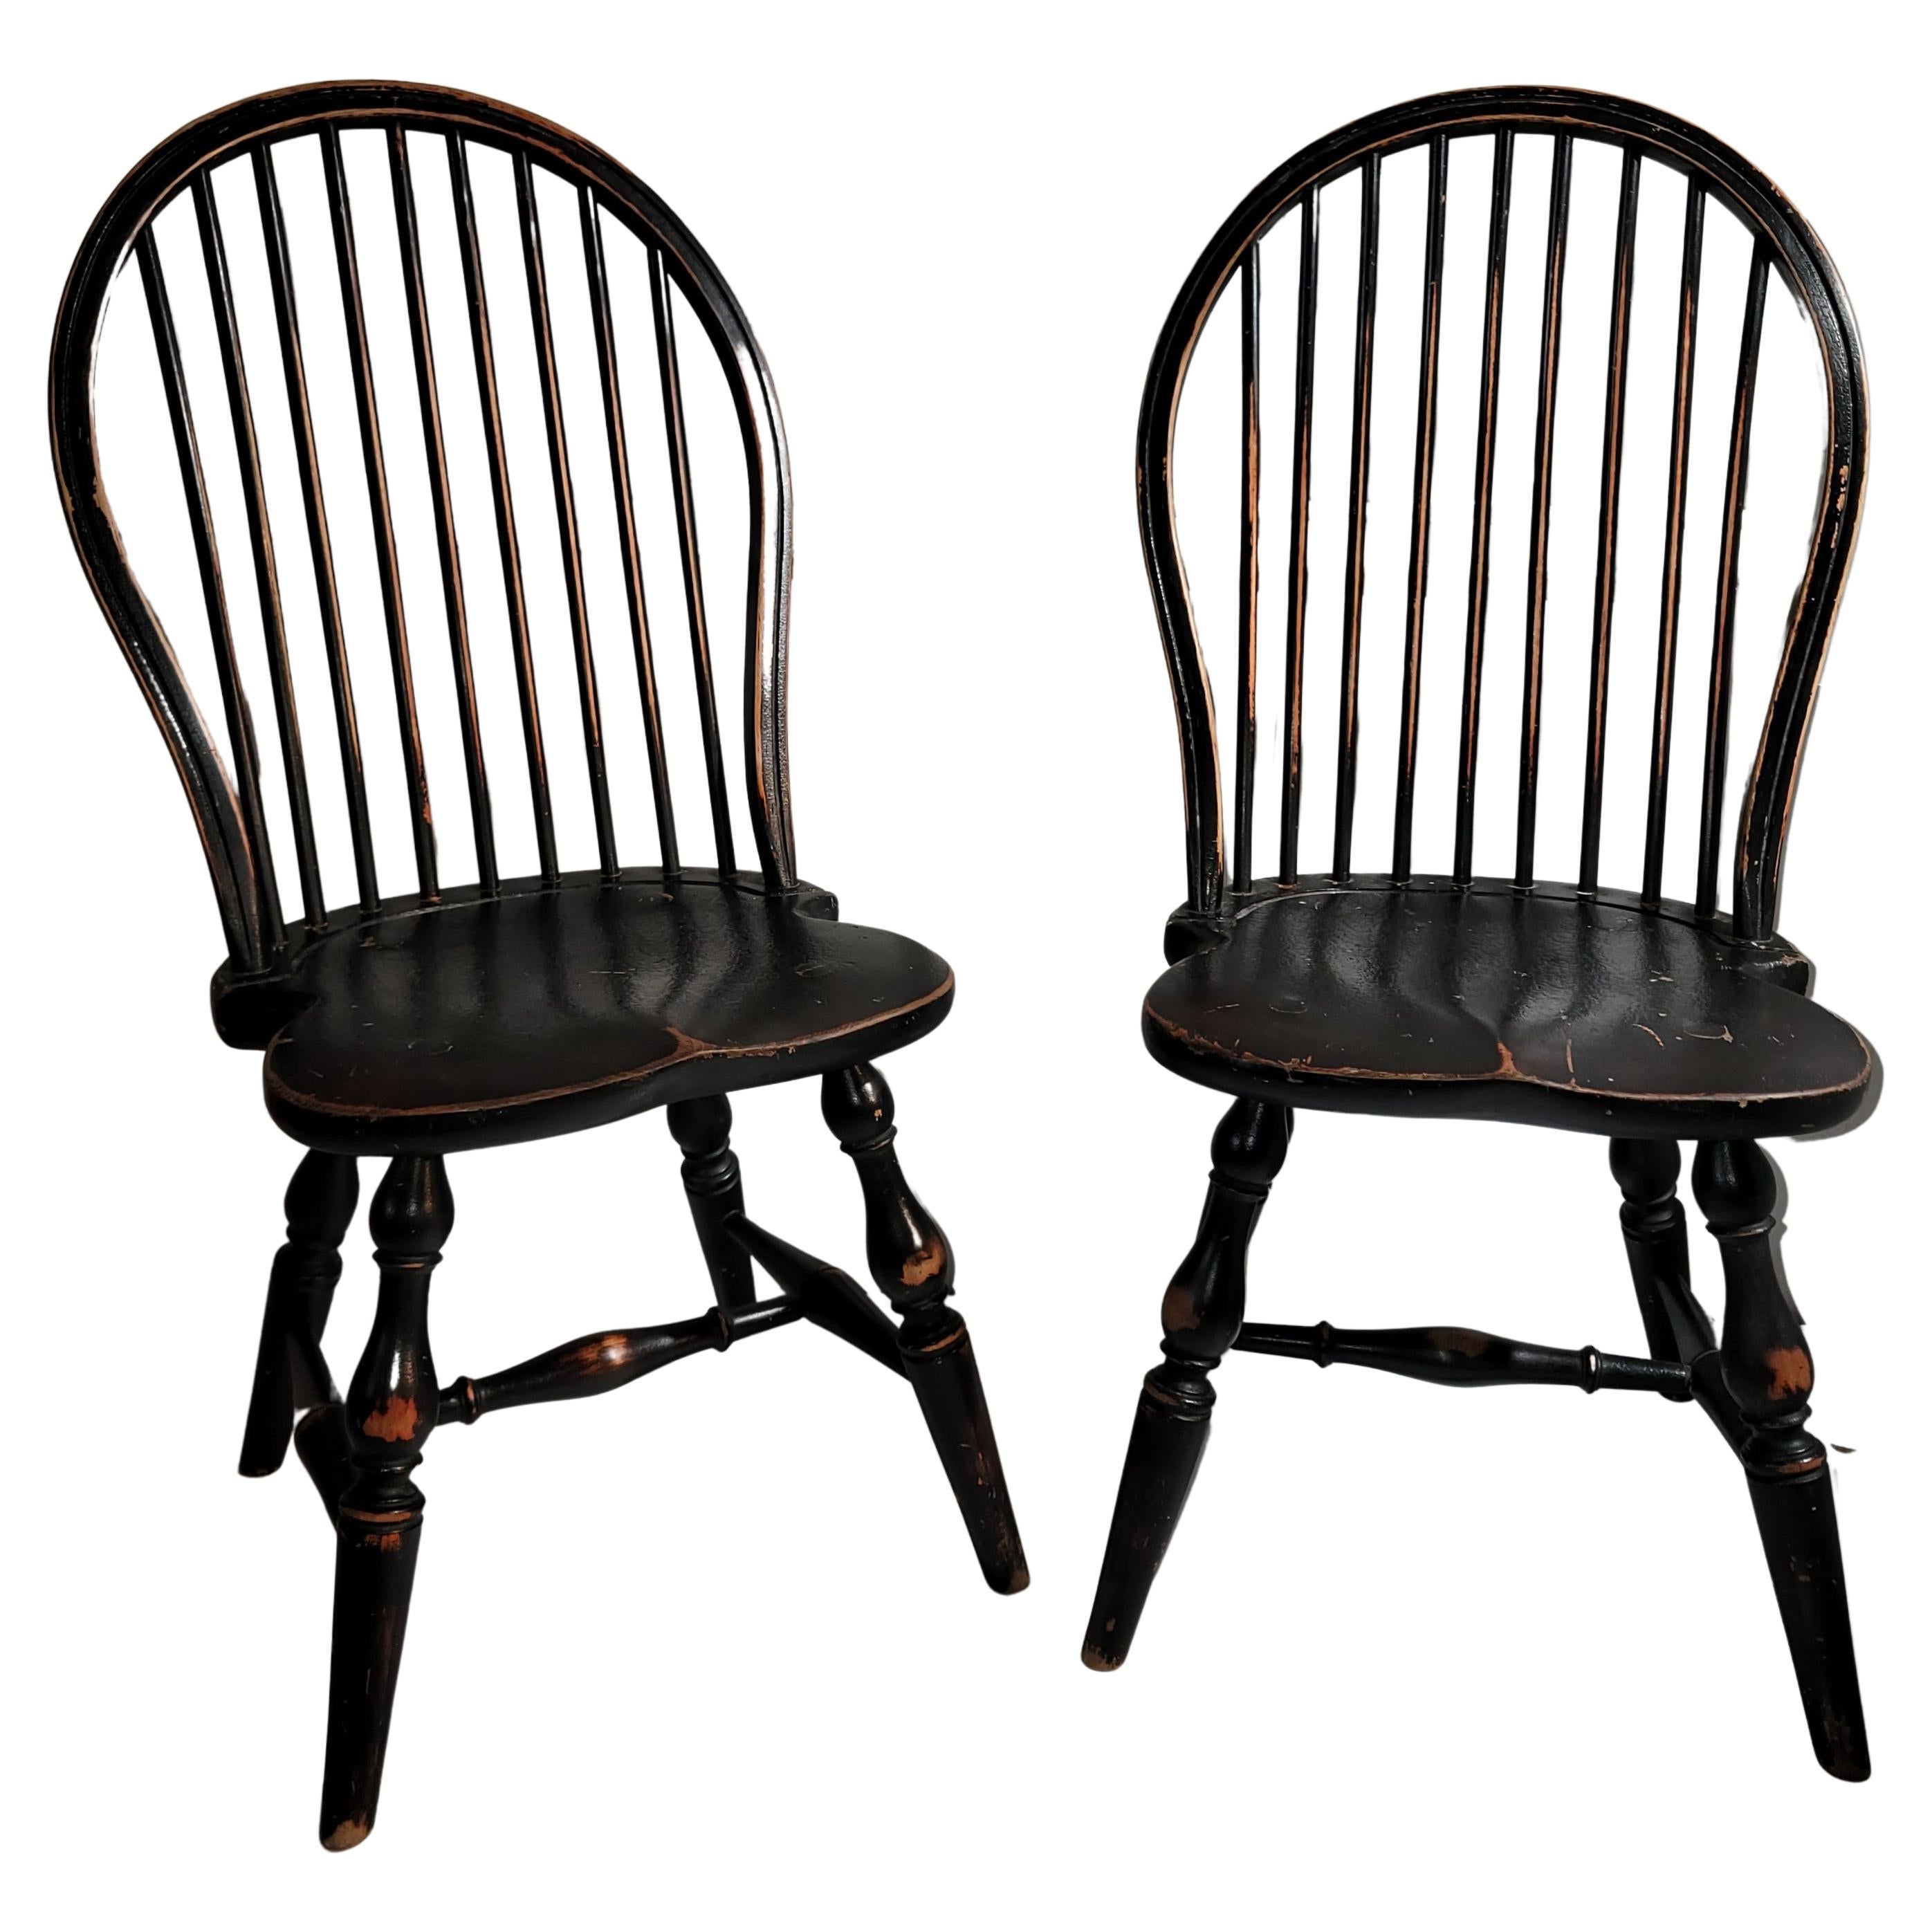 20th Century Windsor Children's Chairs in Original Black Paint For Sale